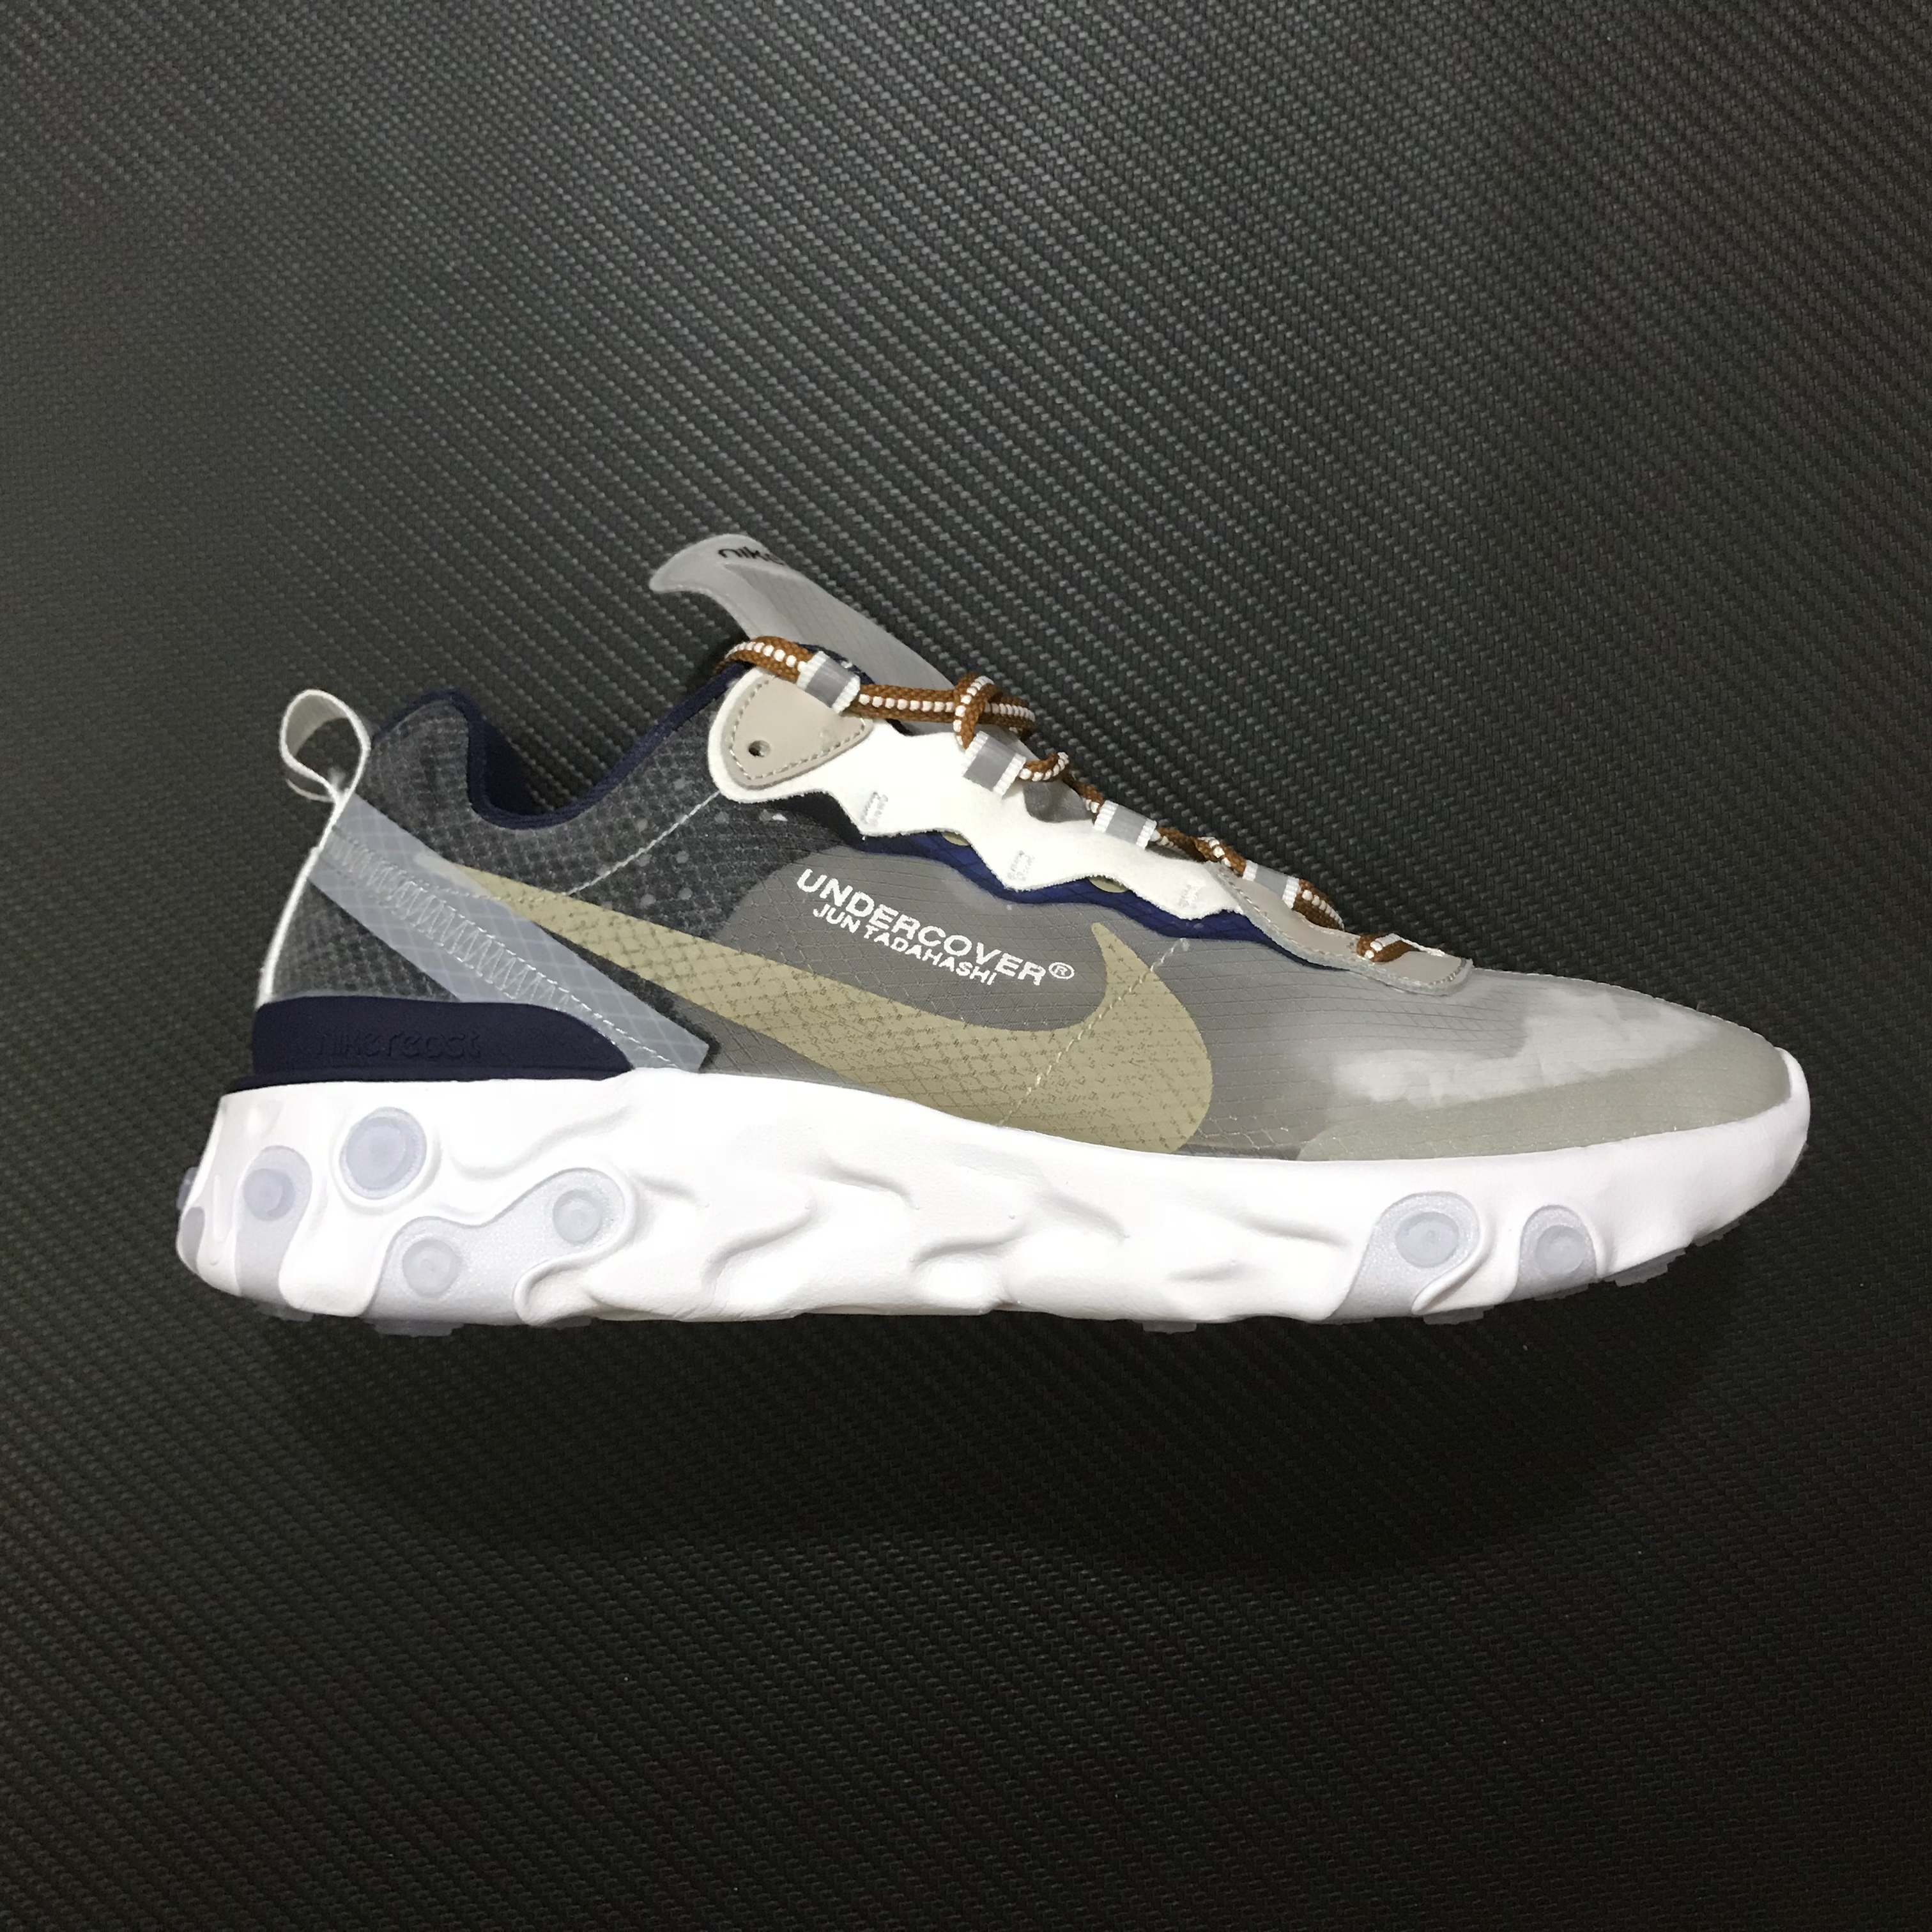 UNDERCOVER x Nike React Element 87 [H. 2]